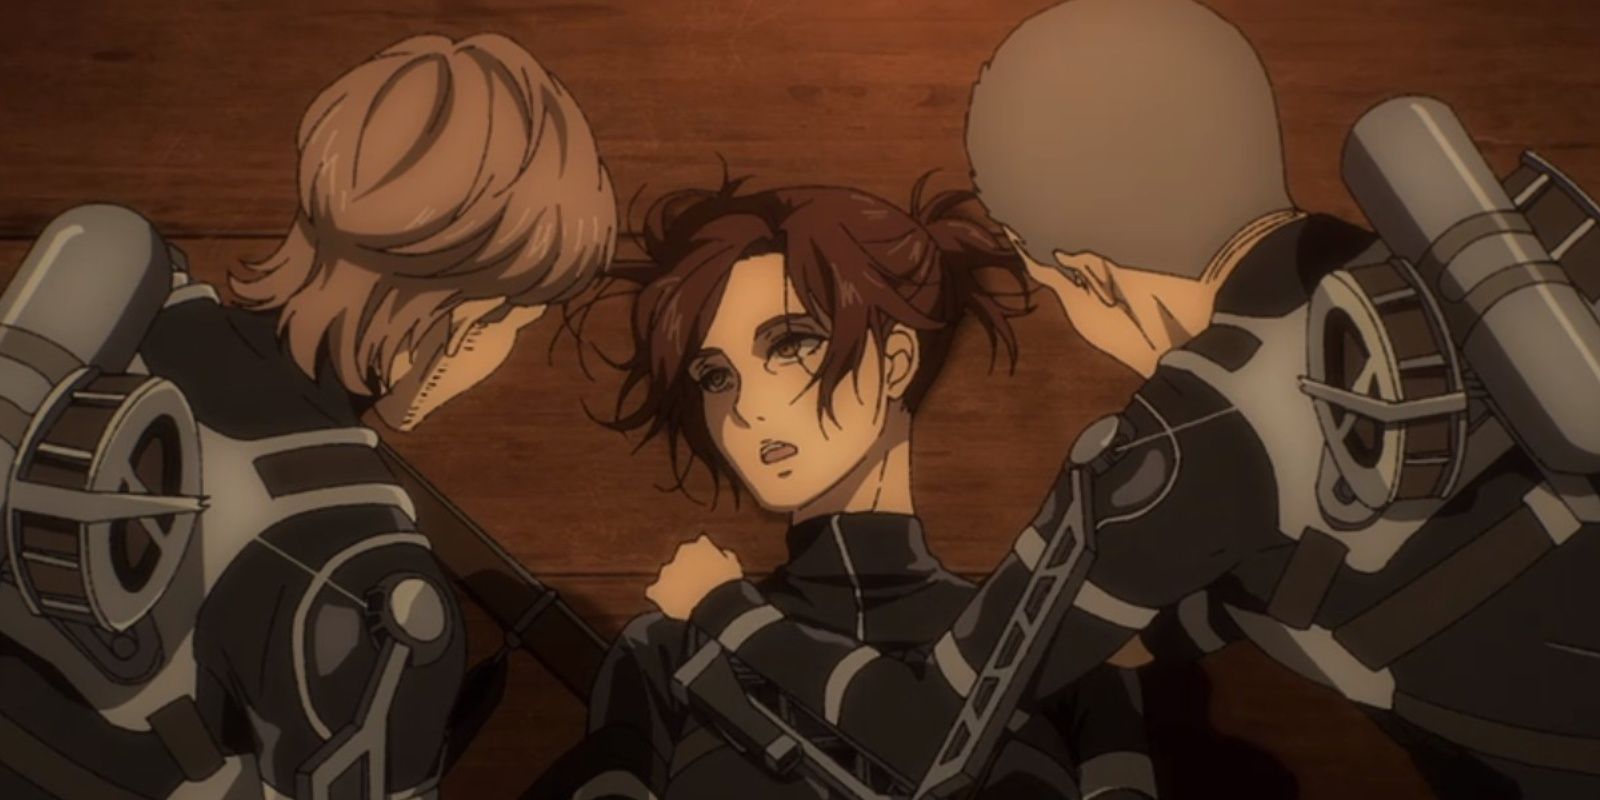 Jean and Connie checking up on Sasha after she was shot by Gabi Braun in Attack On Titan.